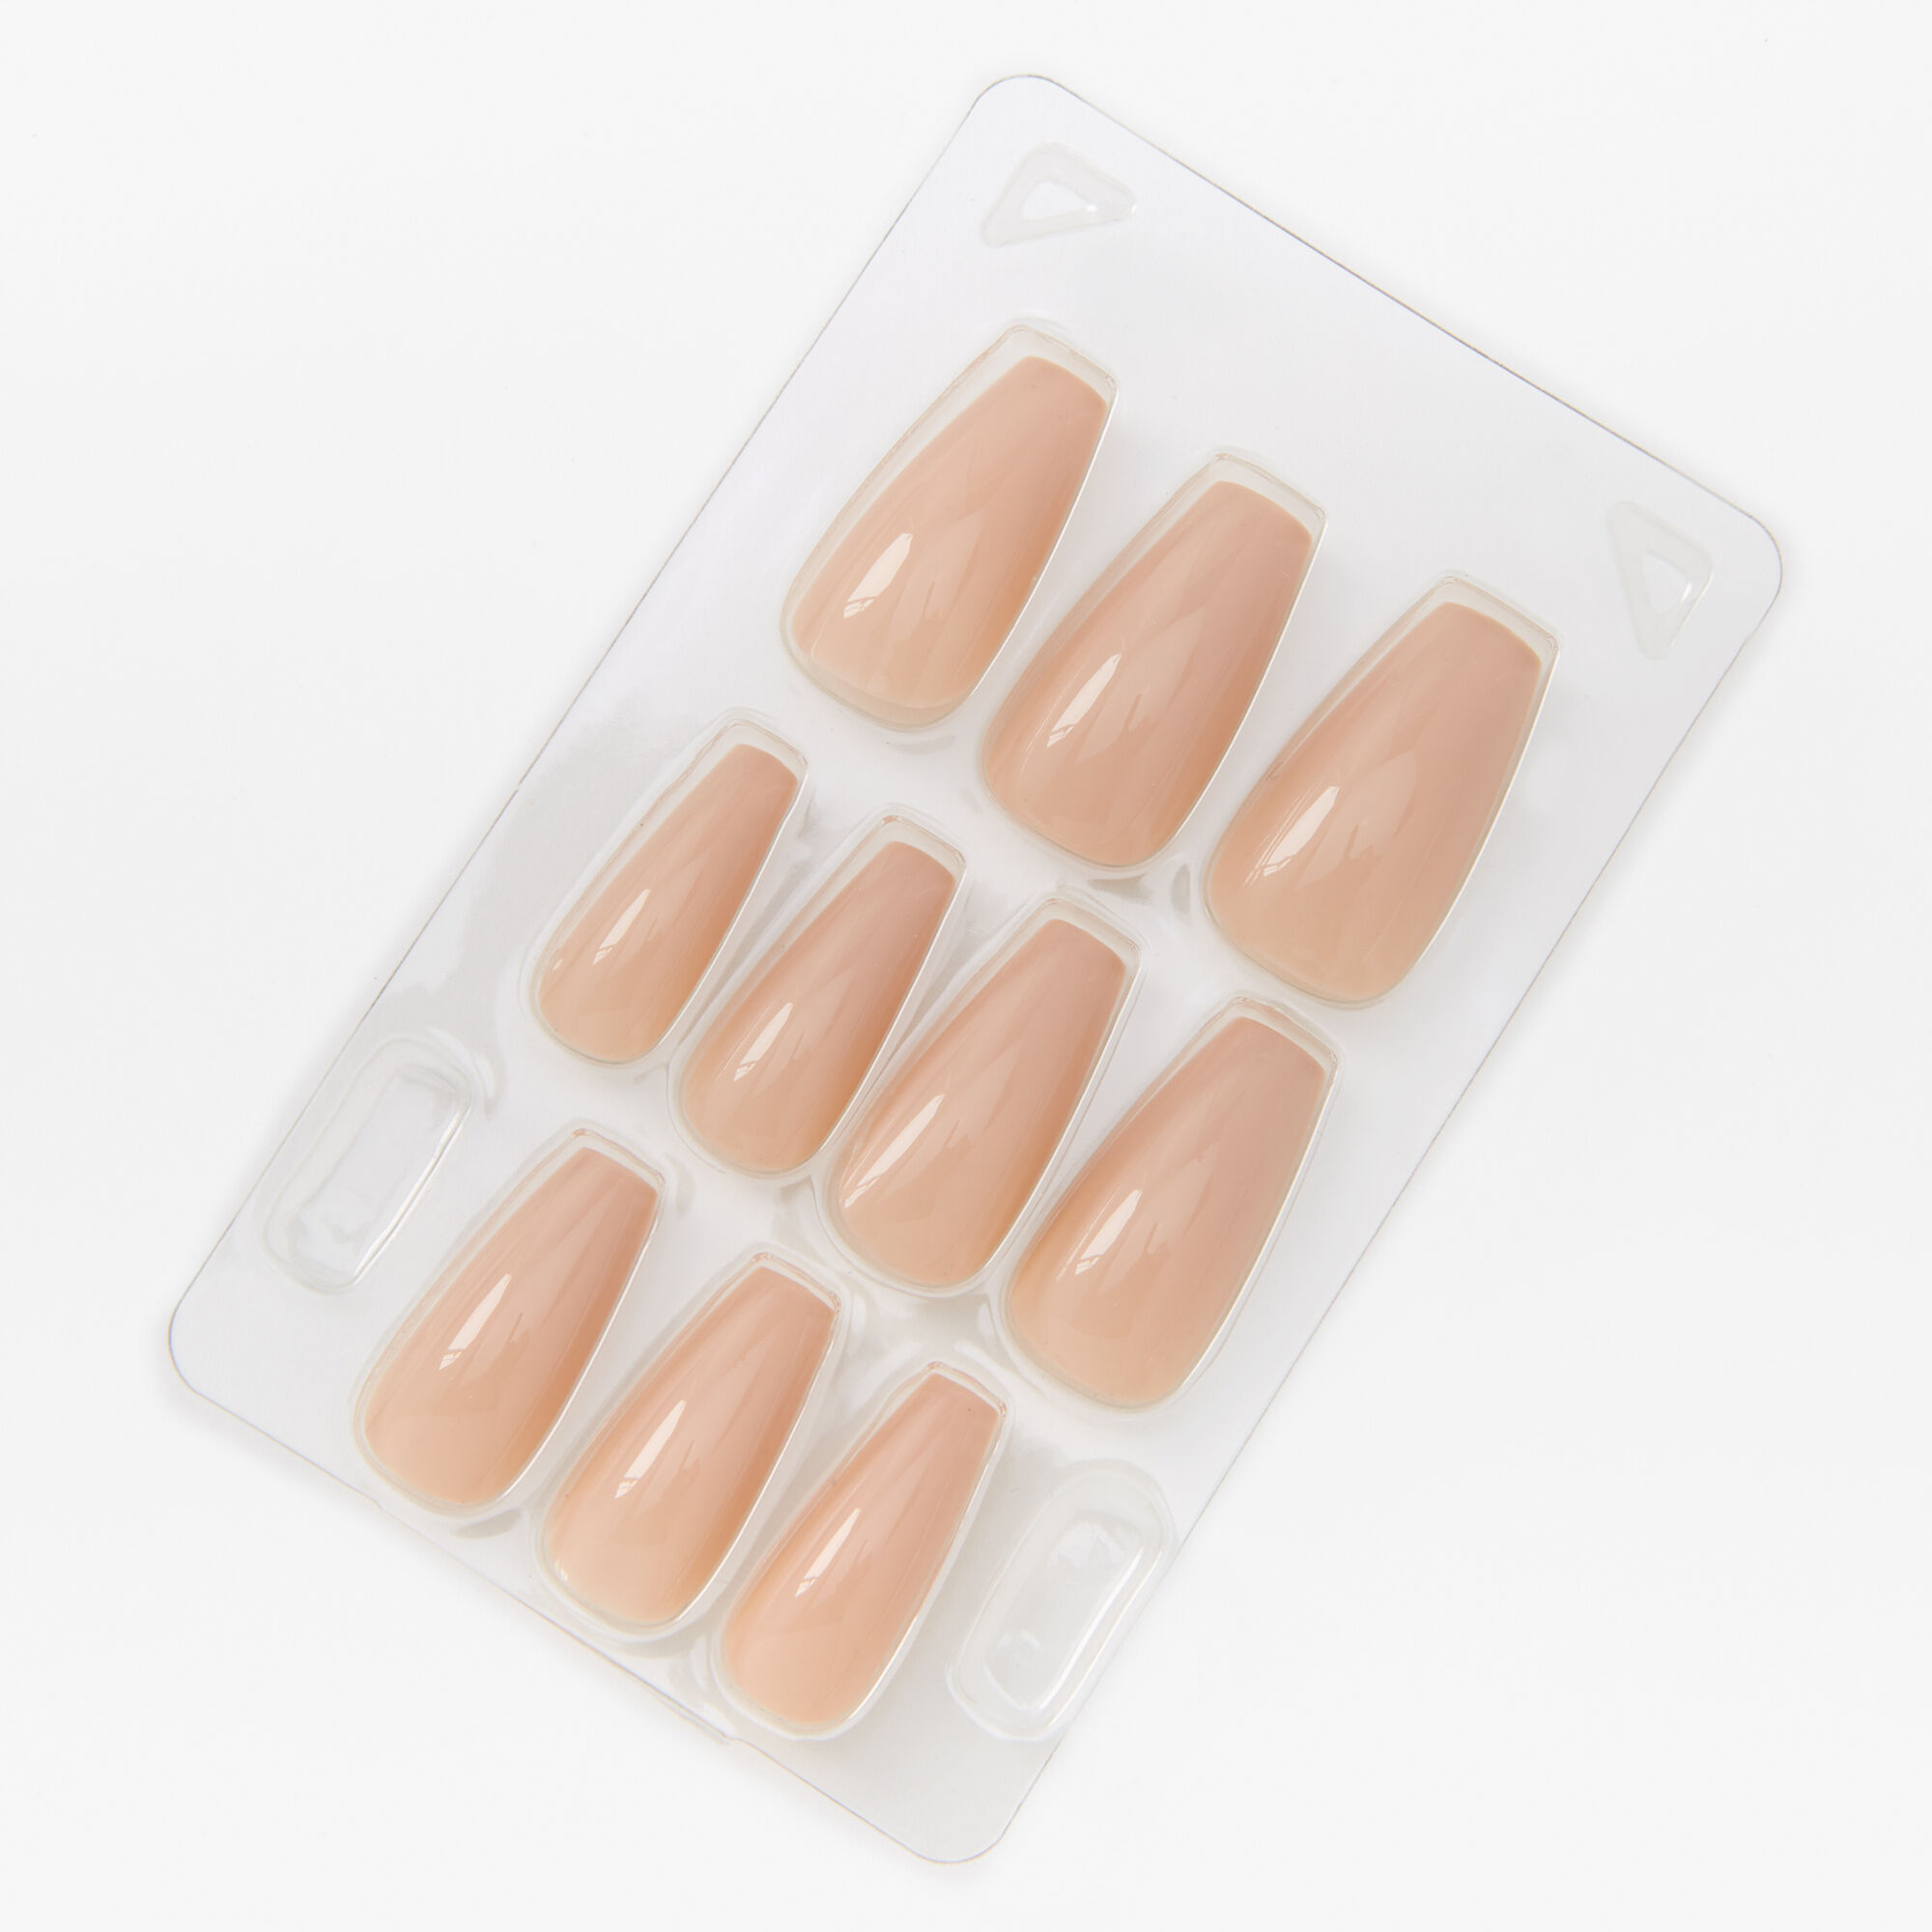 View Claires Nude Glossy Squareletto Press On Vegan Faux Nail Set 24 Pack information